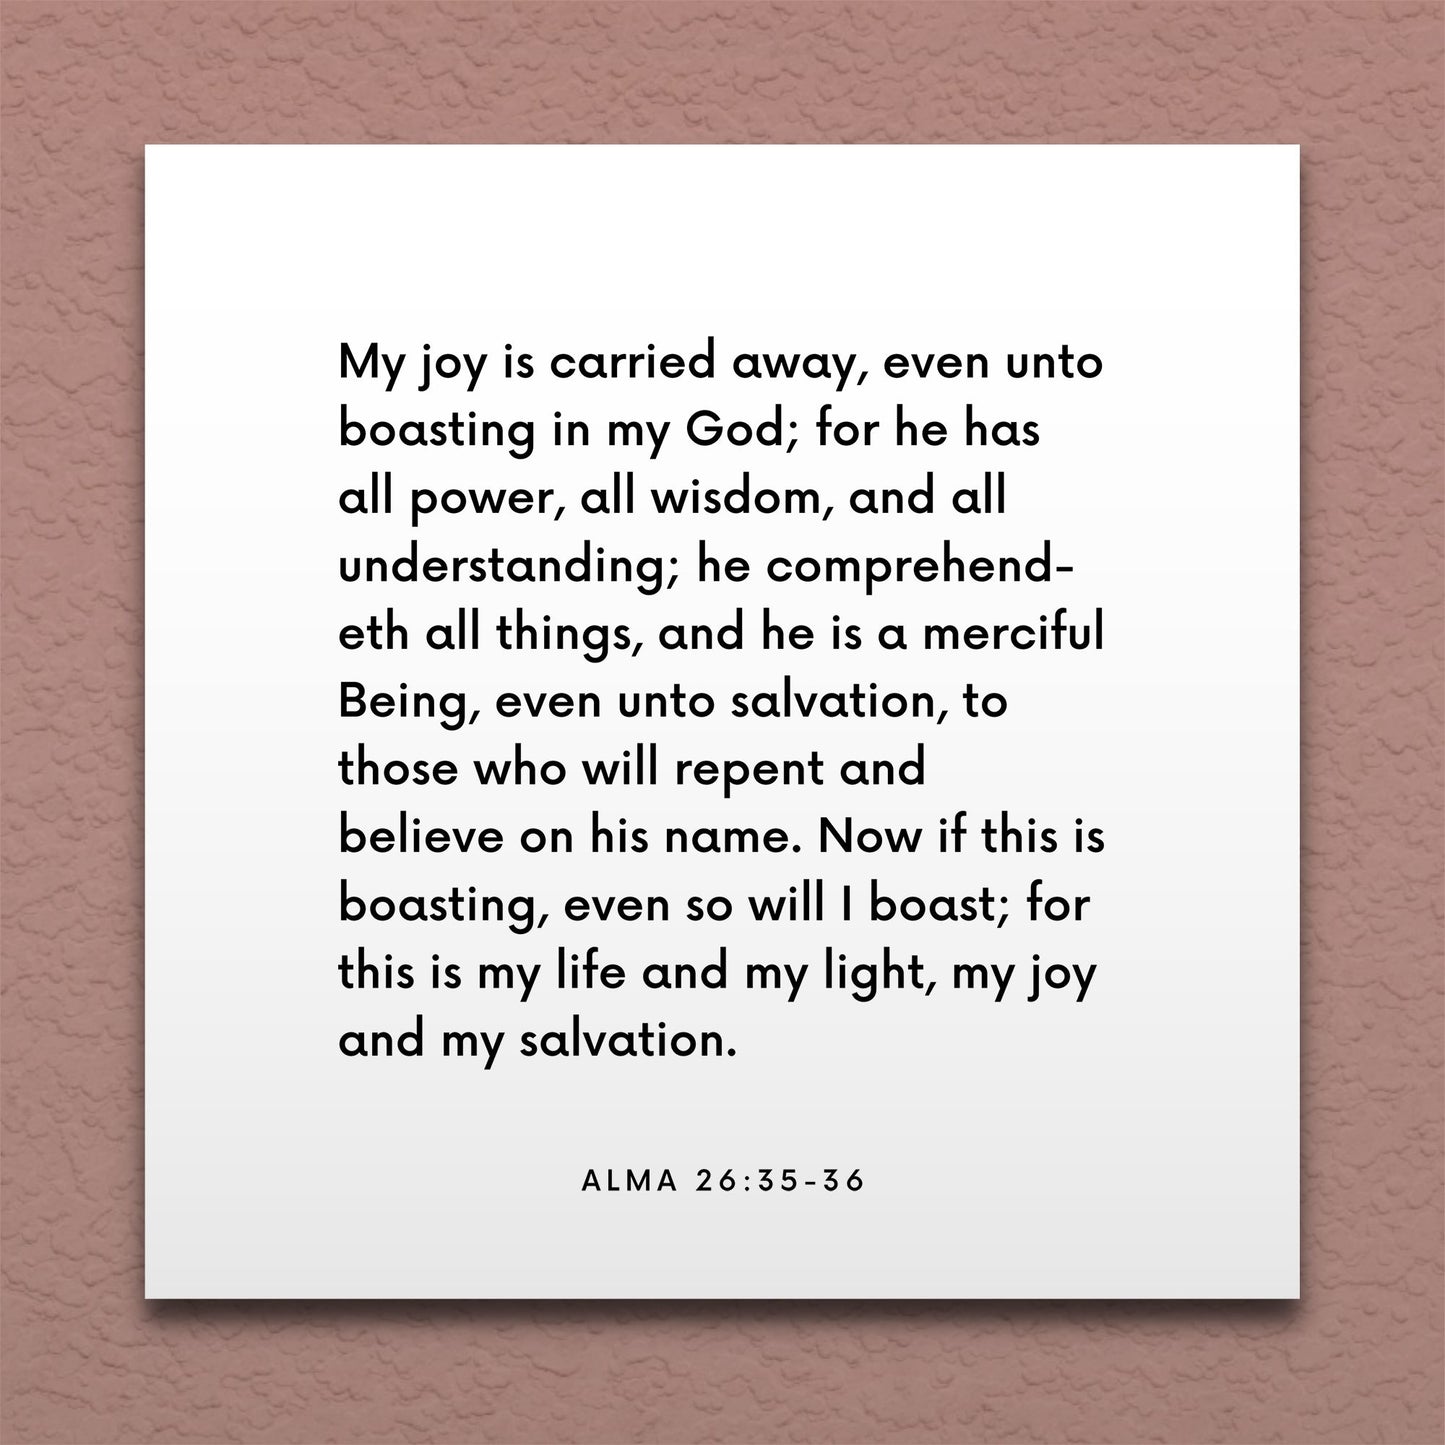 Wall-mounted scripture tile for Alma 26:35-36 - "My joy is carried away, even unto boasting in my God"